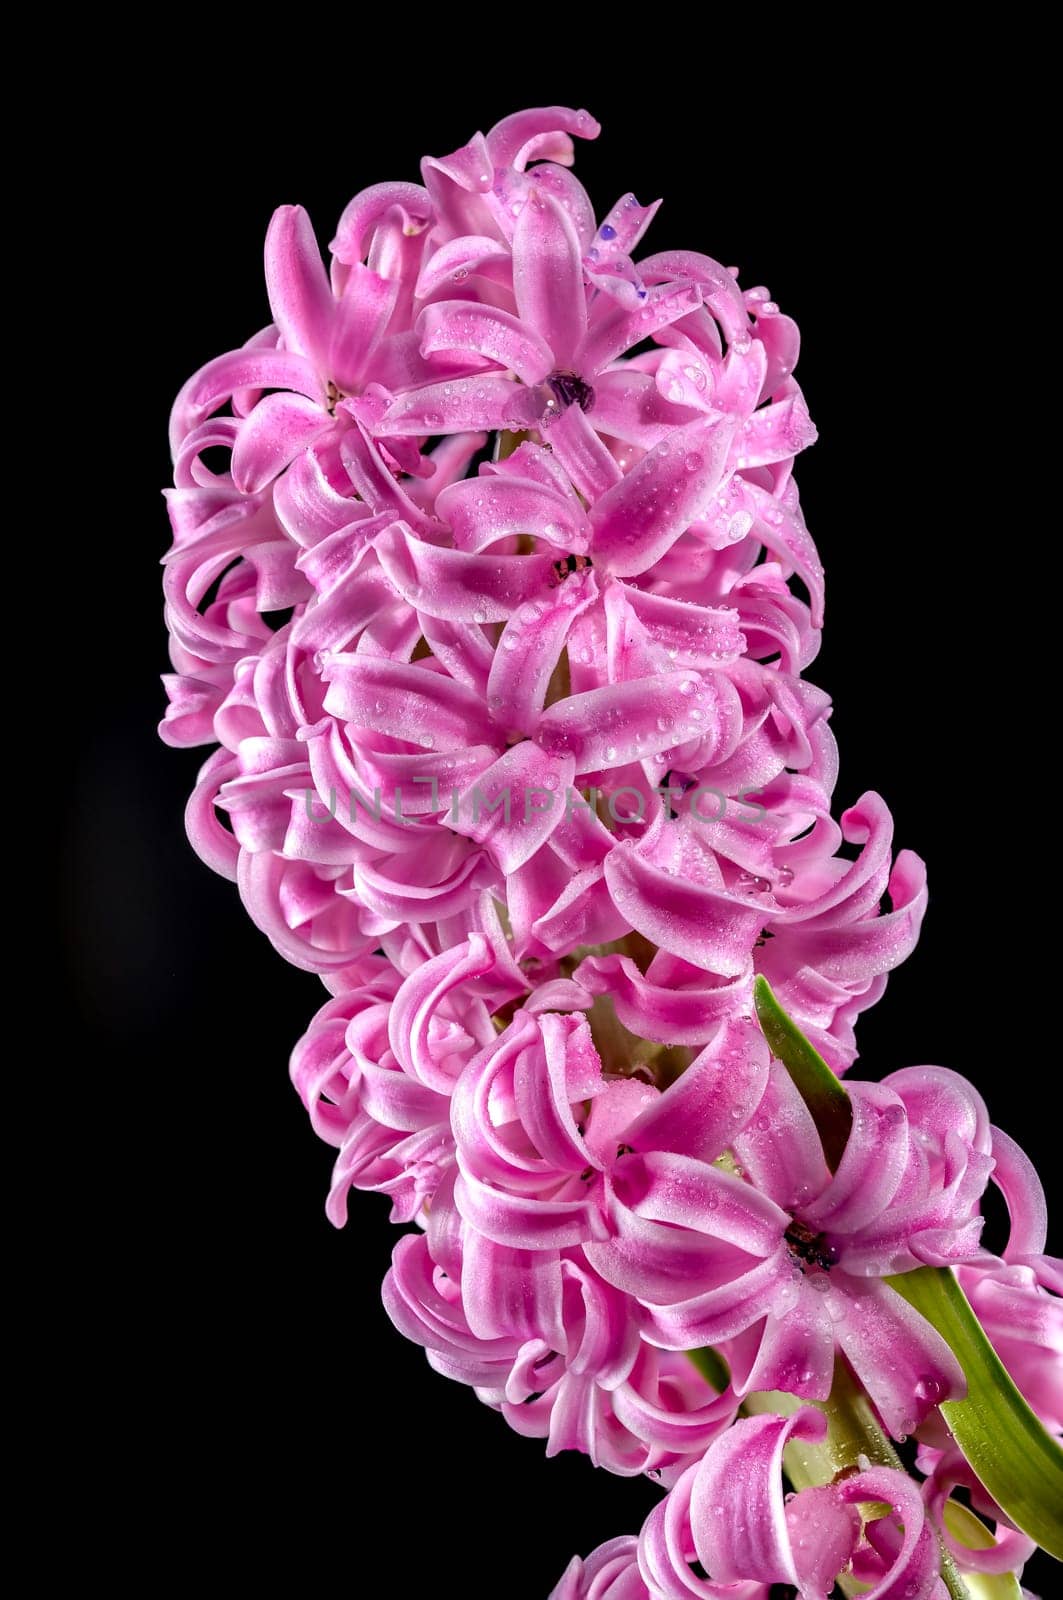 Pink Hyacinth flower on a black background by Multipedia